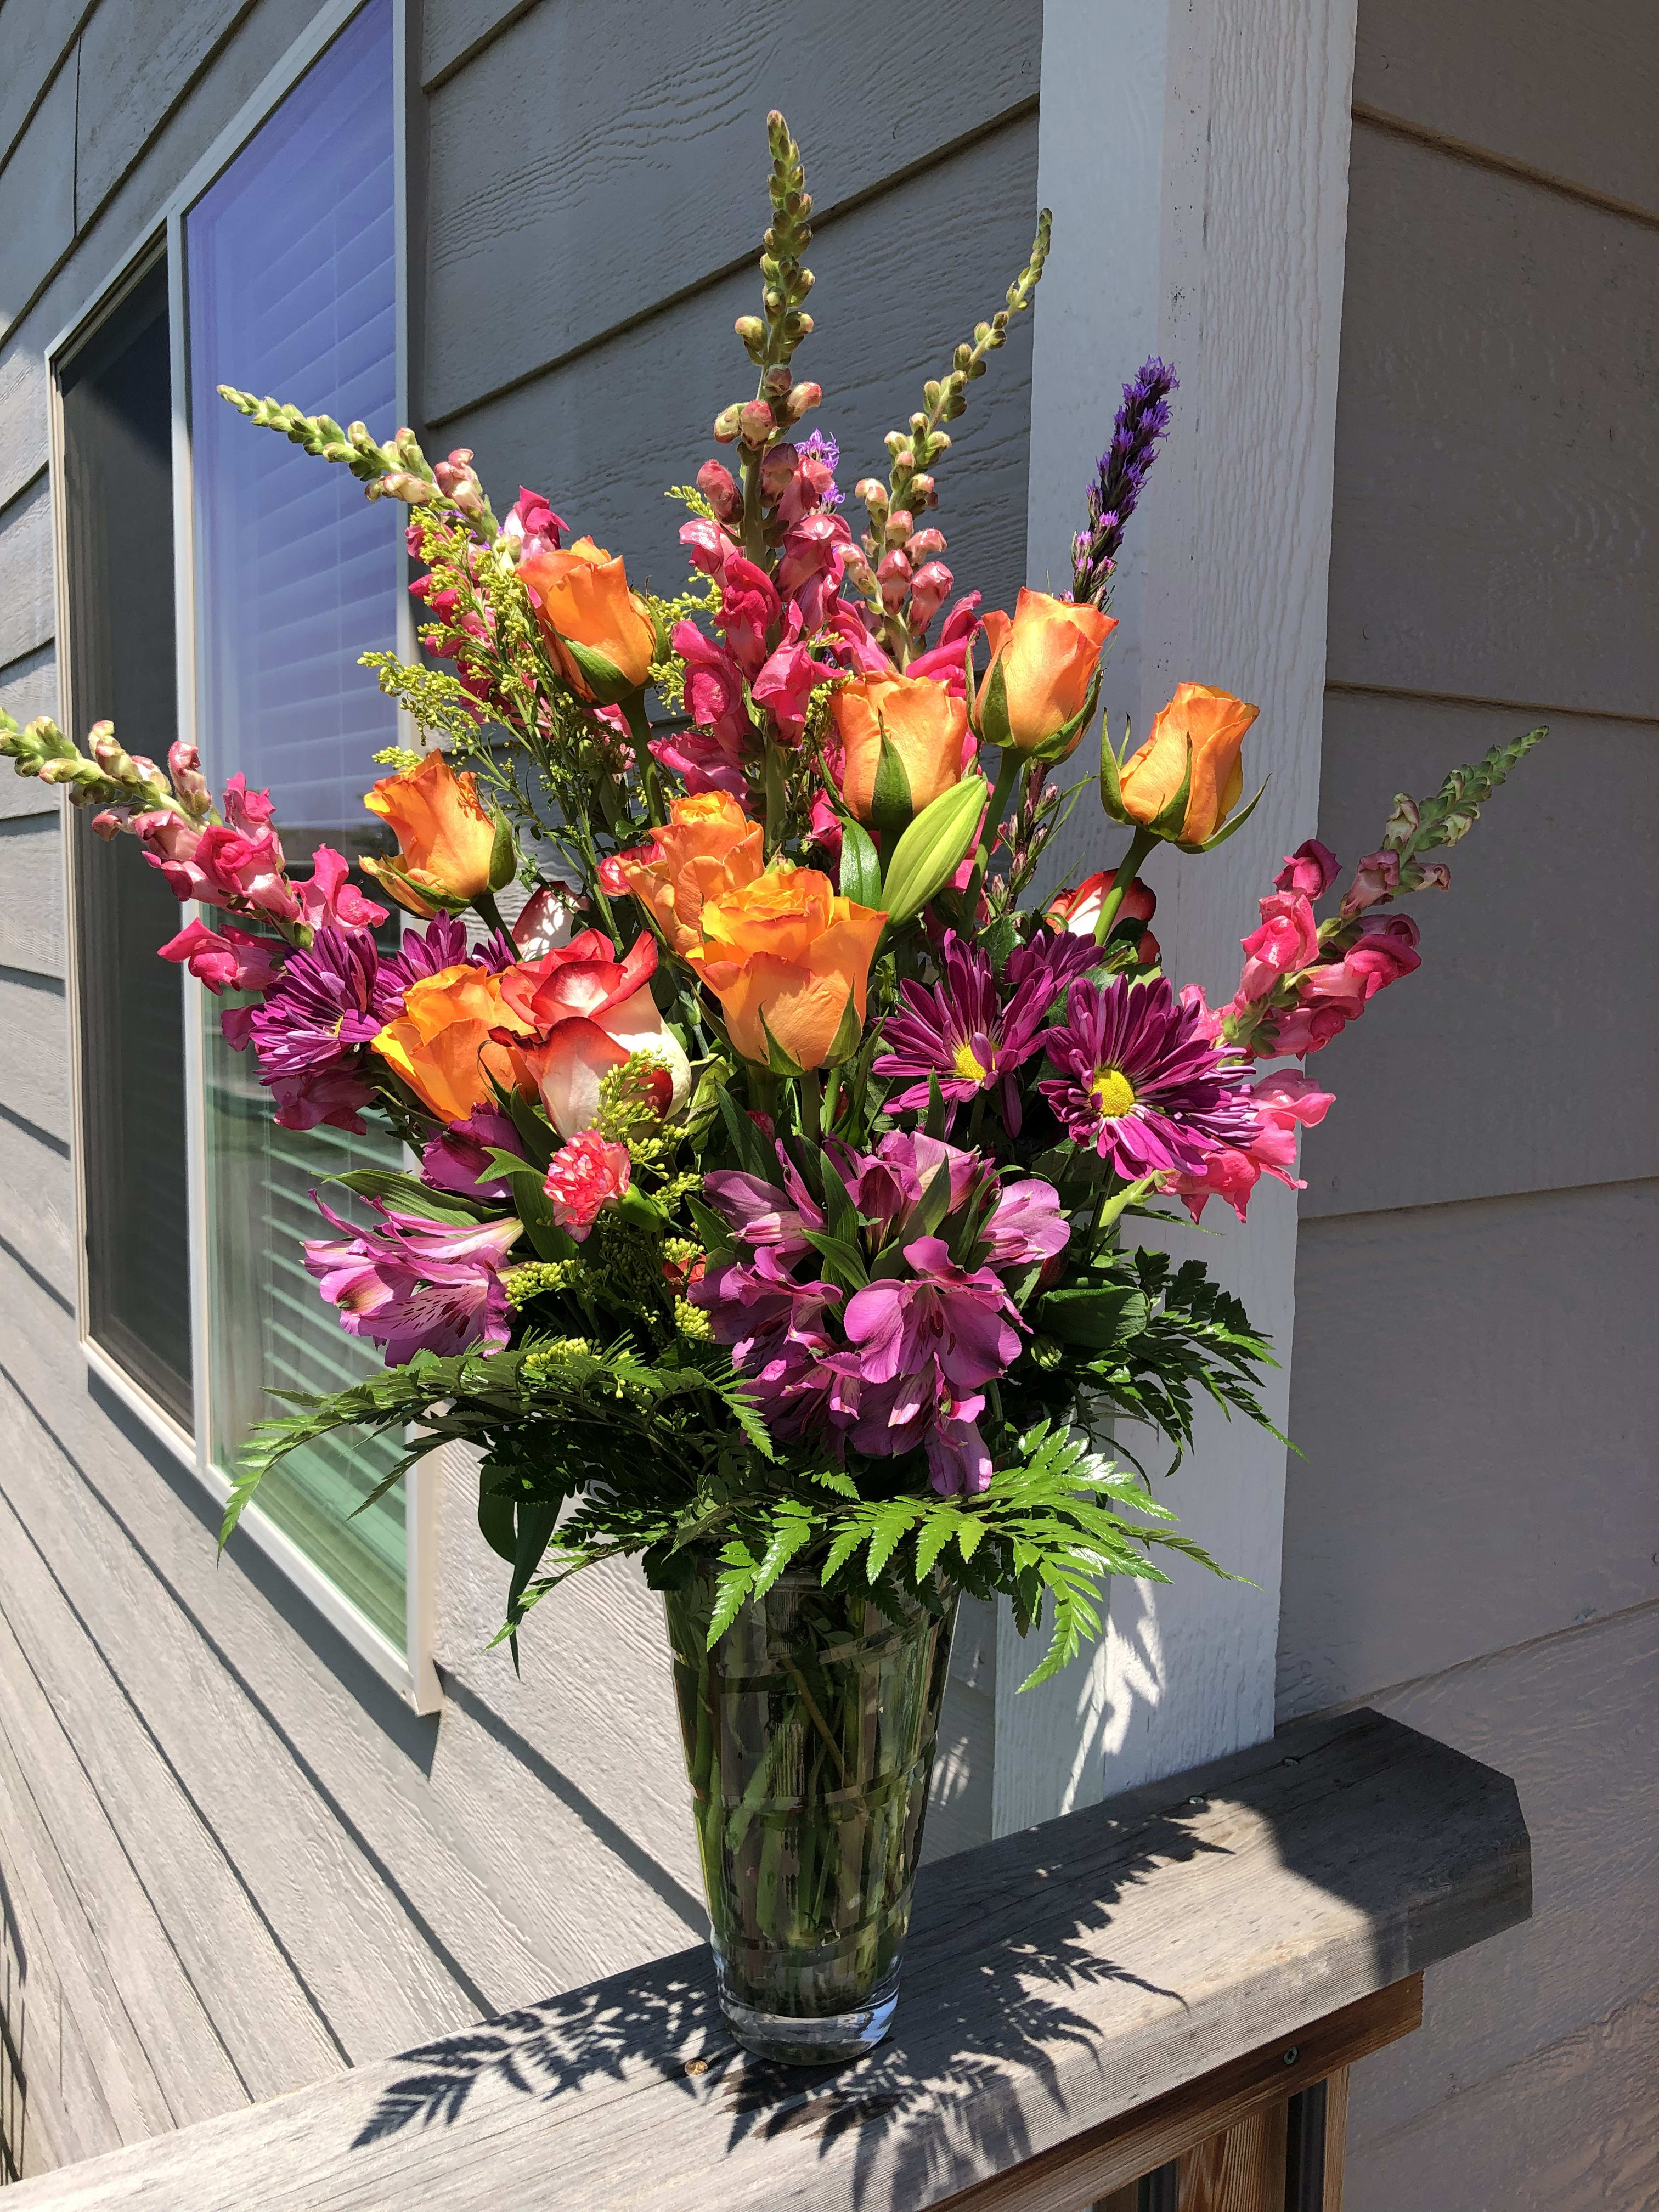 Roses, lilies, carnations, and other seasonal flowers.  - Multi colored mixed bouquet